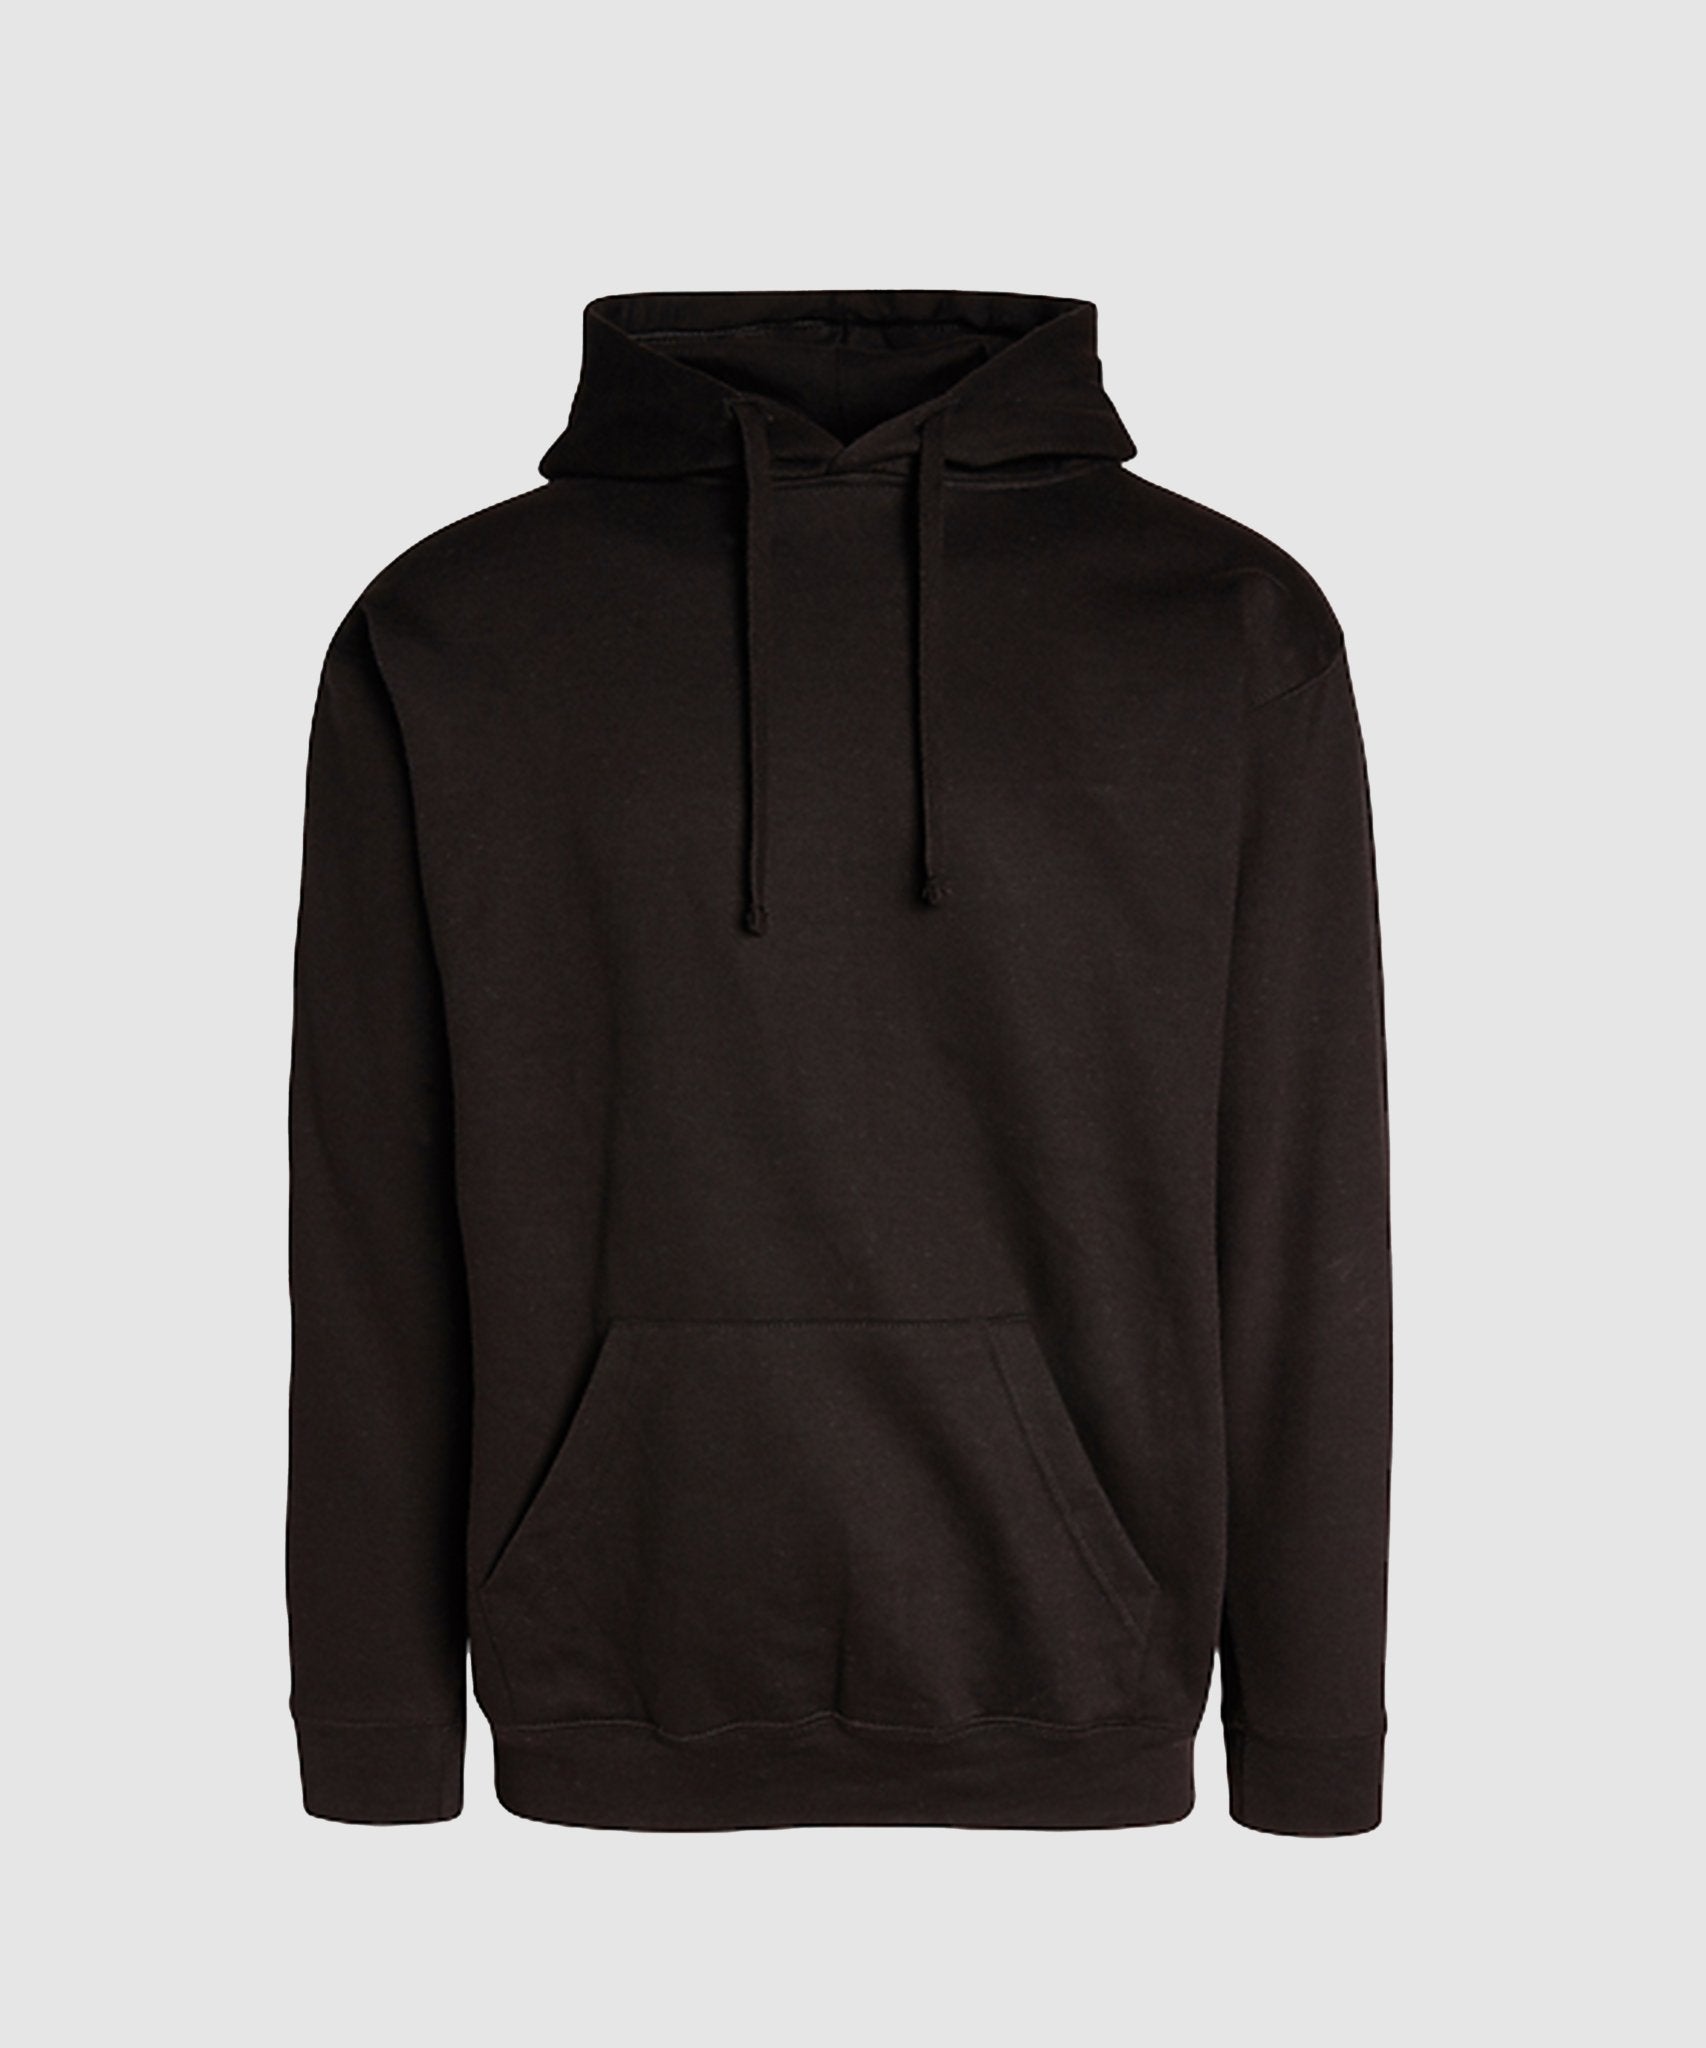 GWPHZS5001 - G West Unisex Essential Pullover Hoodie - 9 Colors (SHIPS IMMEDIATELY) - G West Blanks